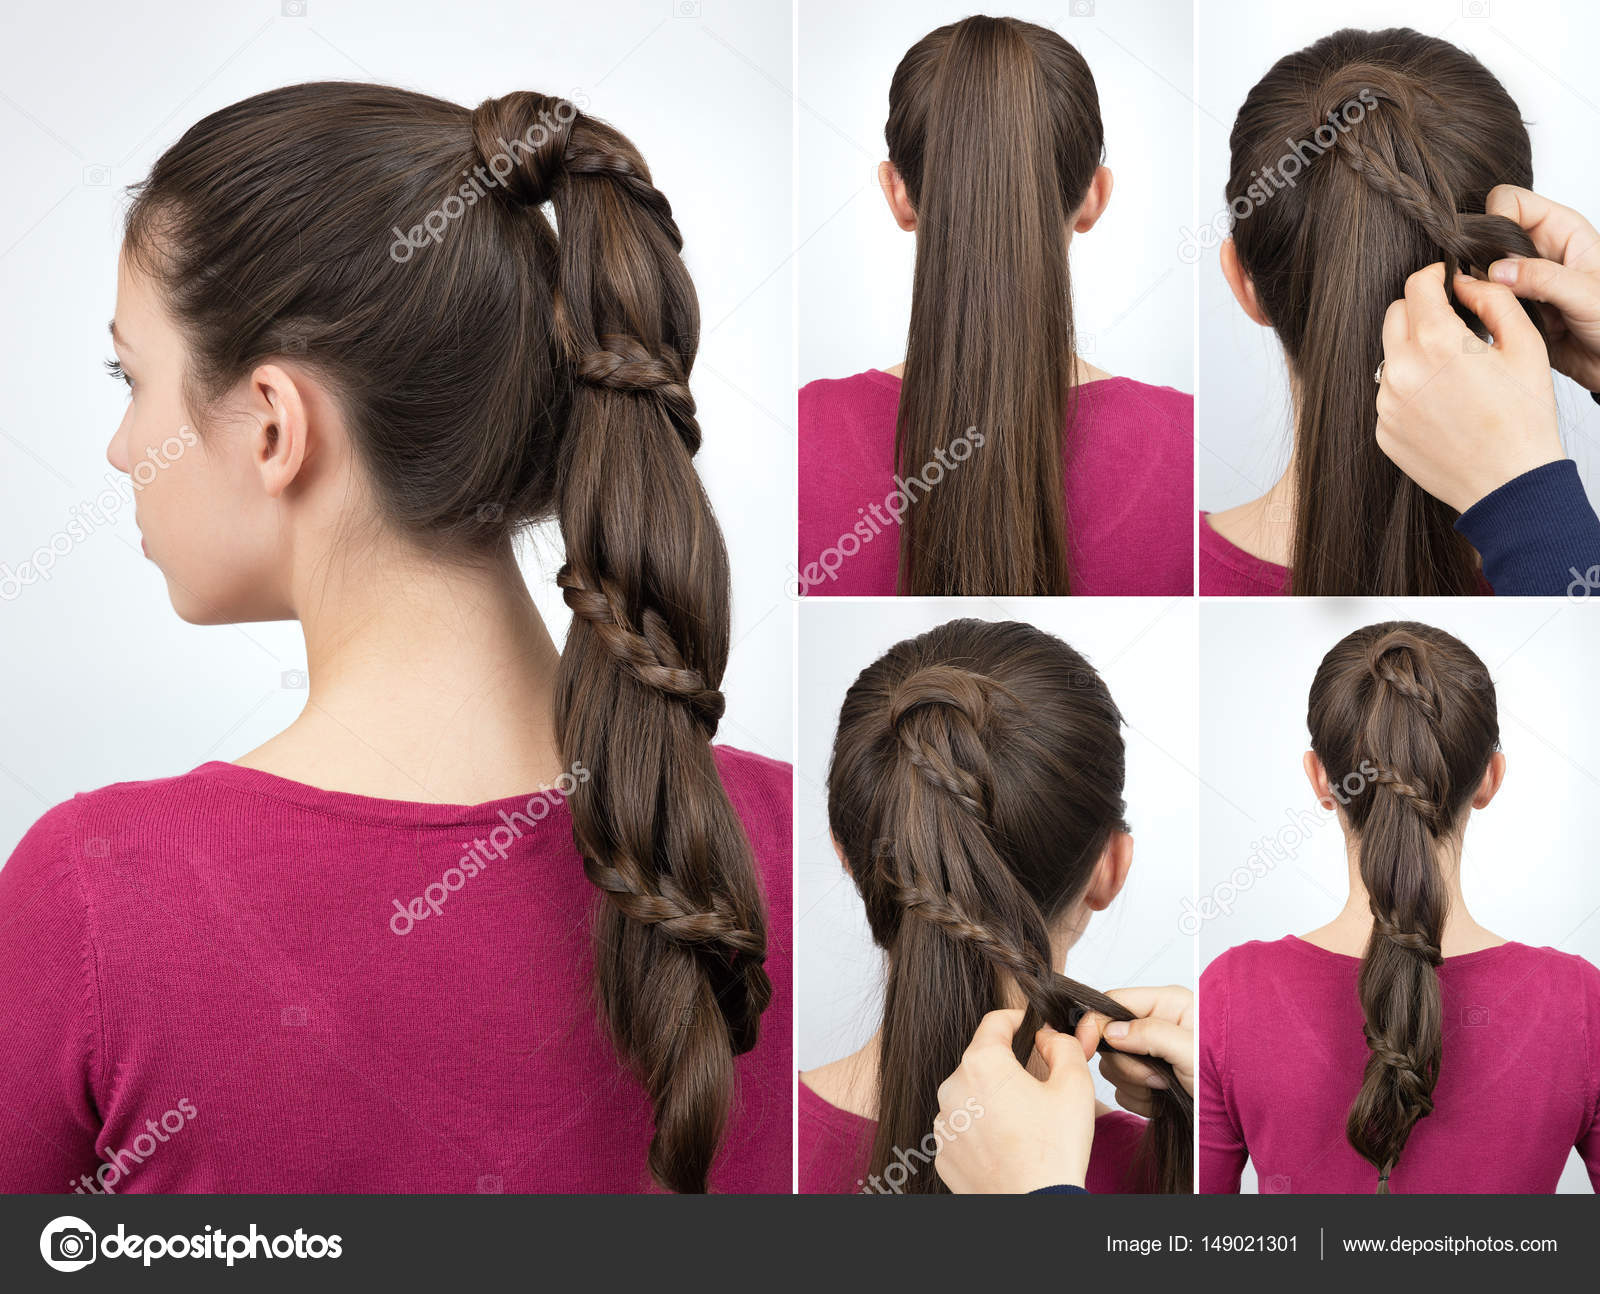 Easy and Elegant Twist Hairstyle for Busy Mornings - Twist Me Pretty